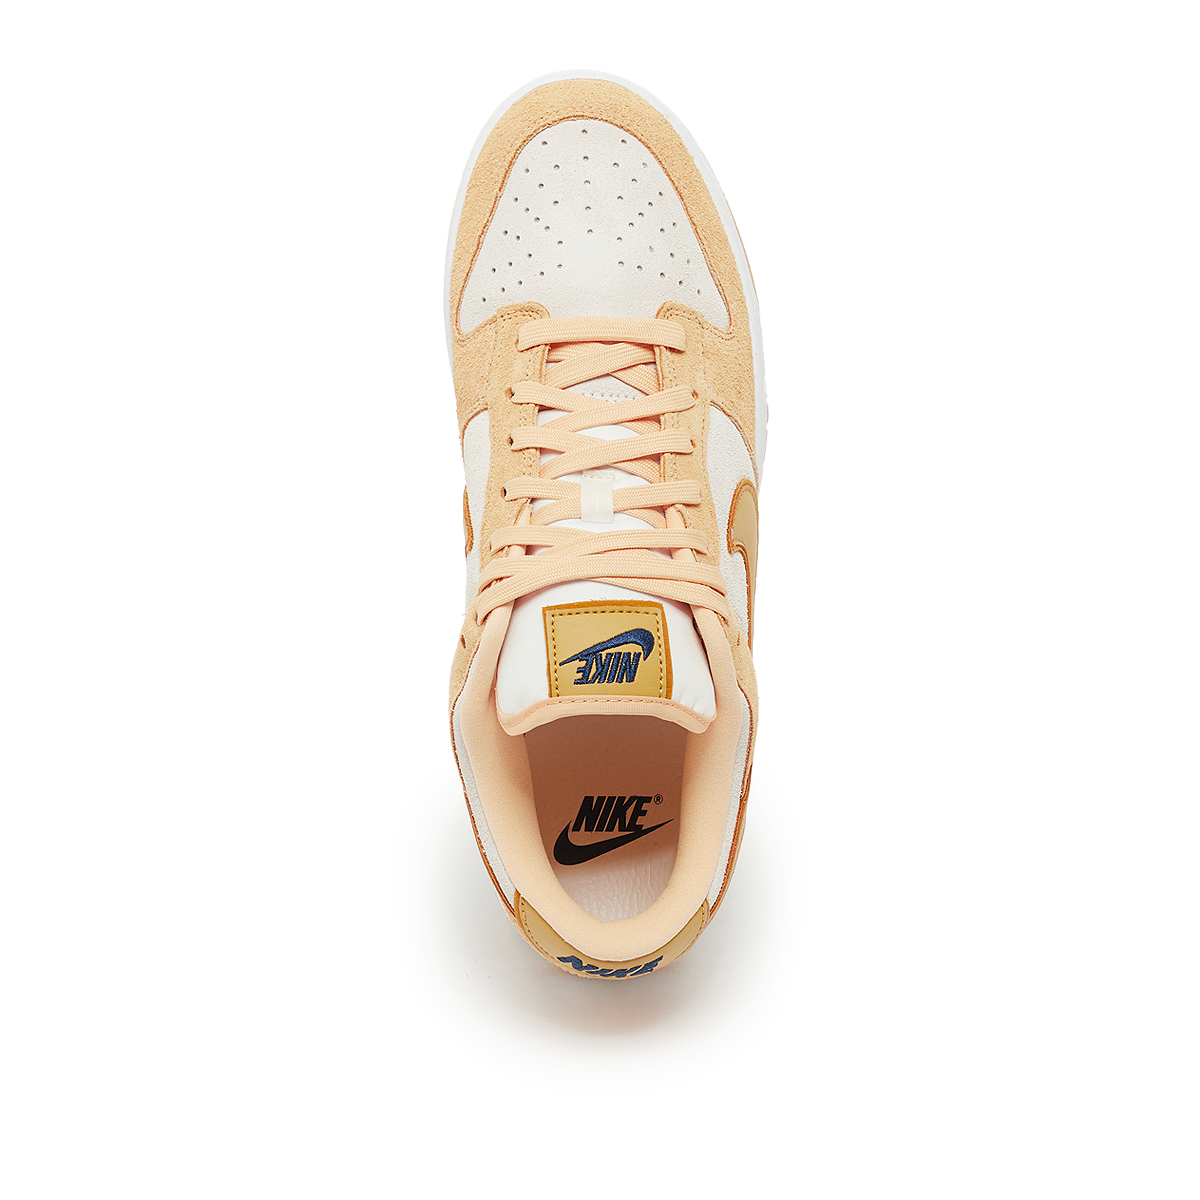 Dunk Low "Celestial Gold"